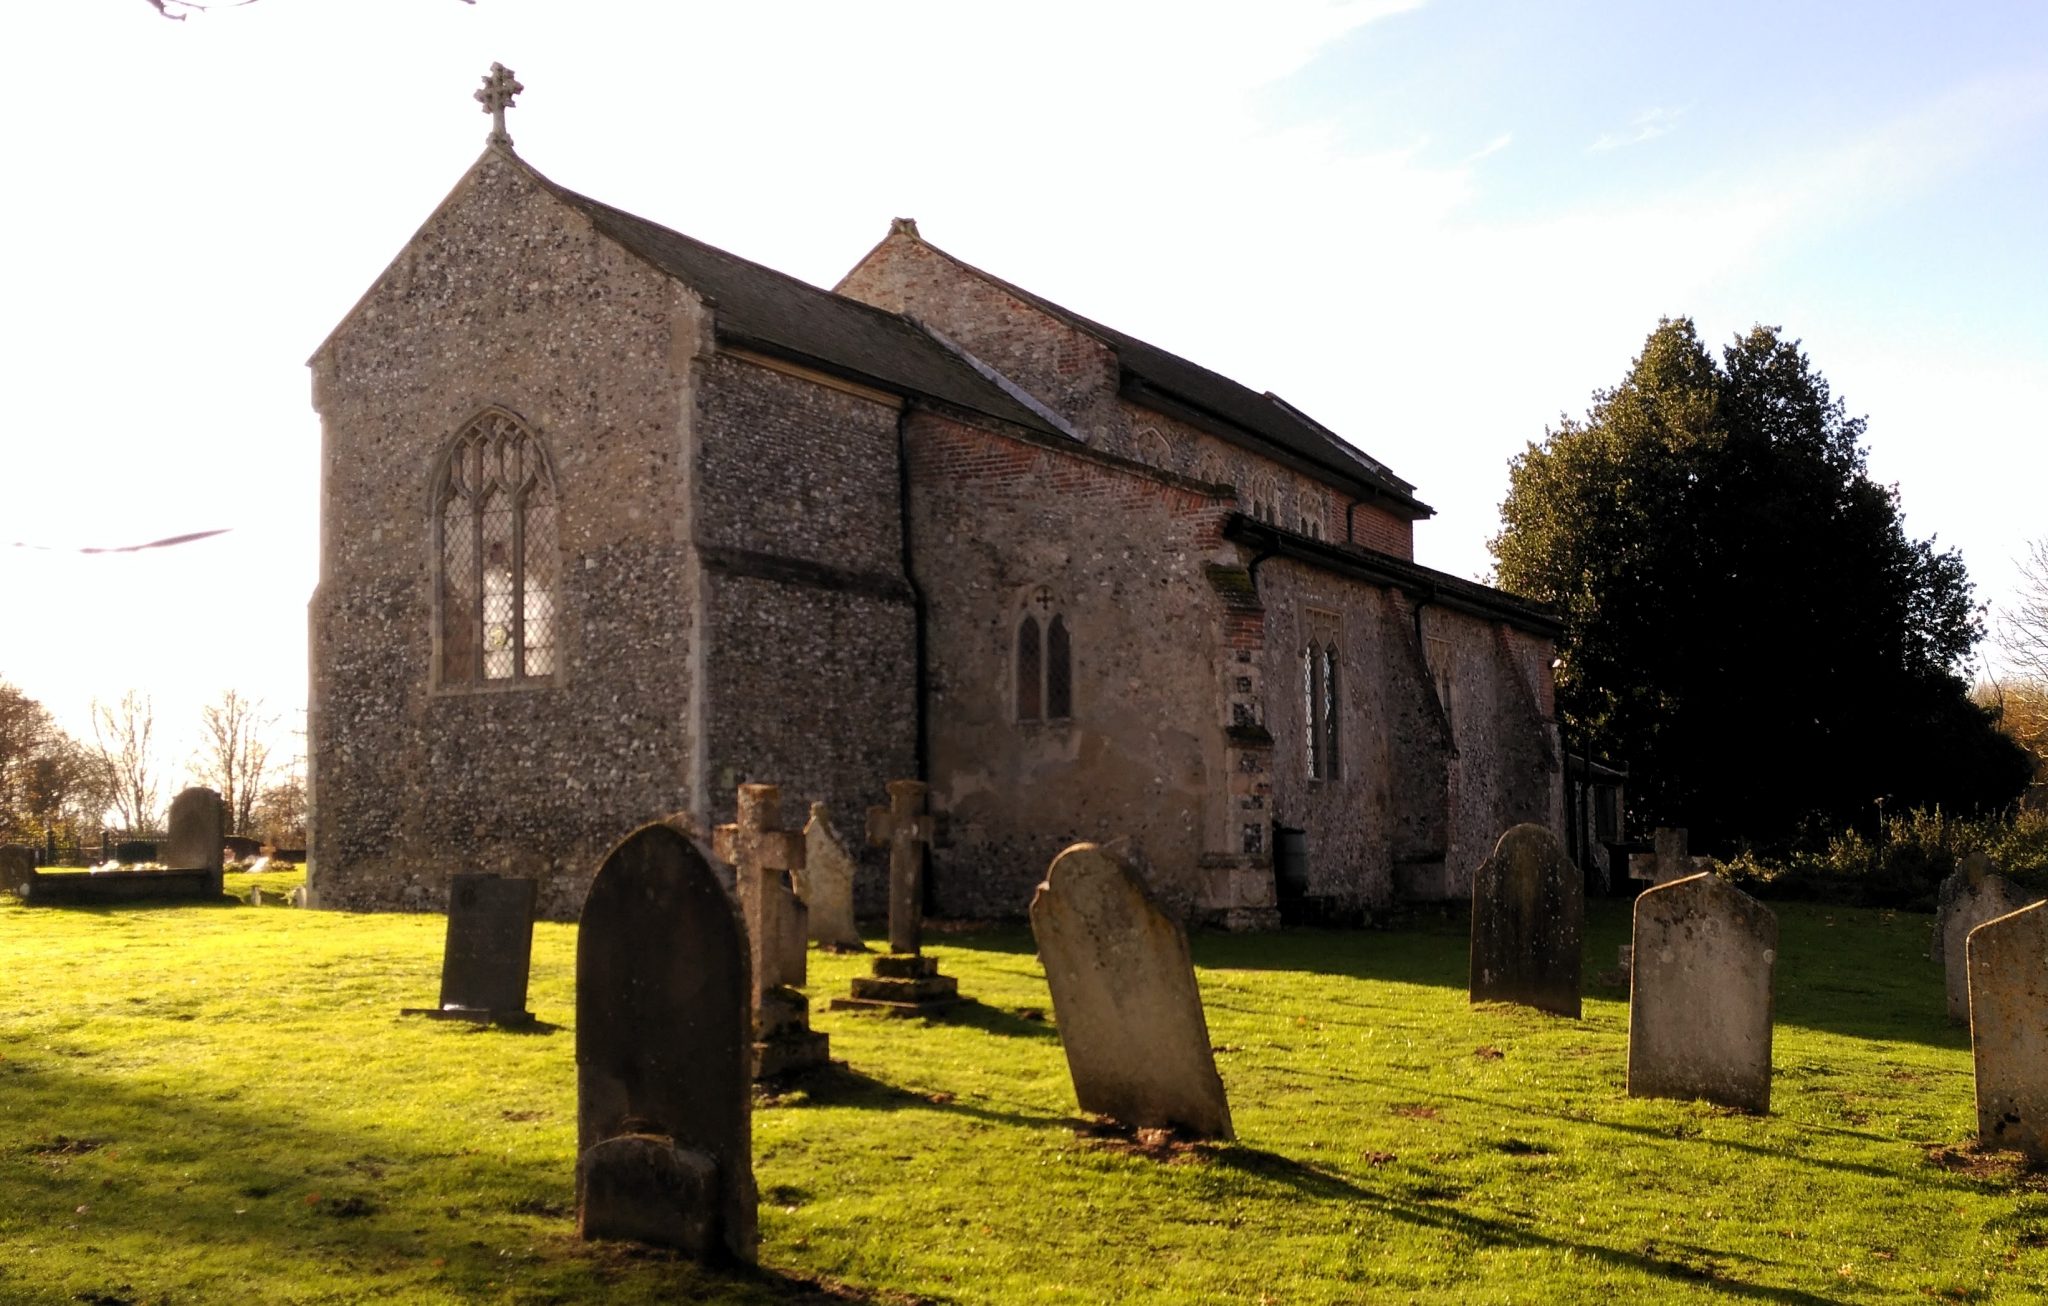 Norfolk Church yard with gravestones in the foreground